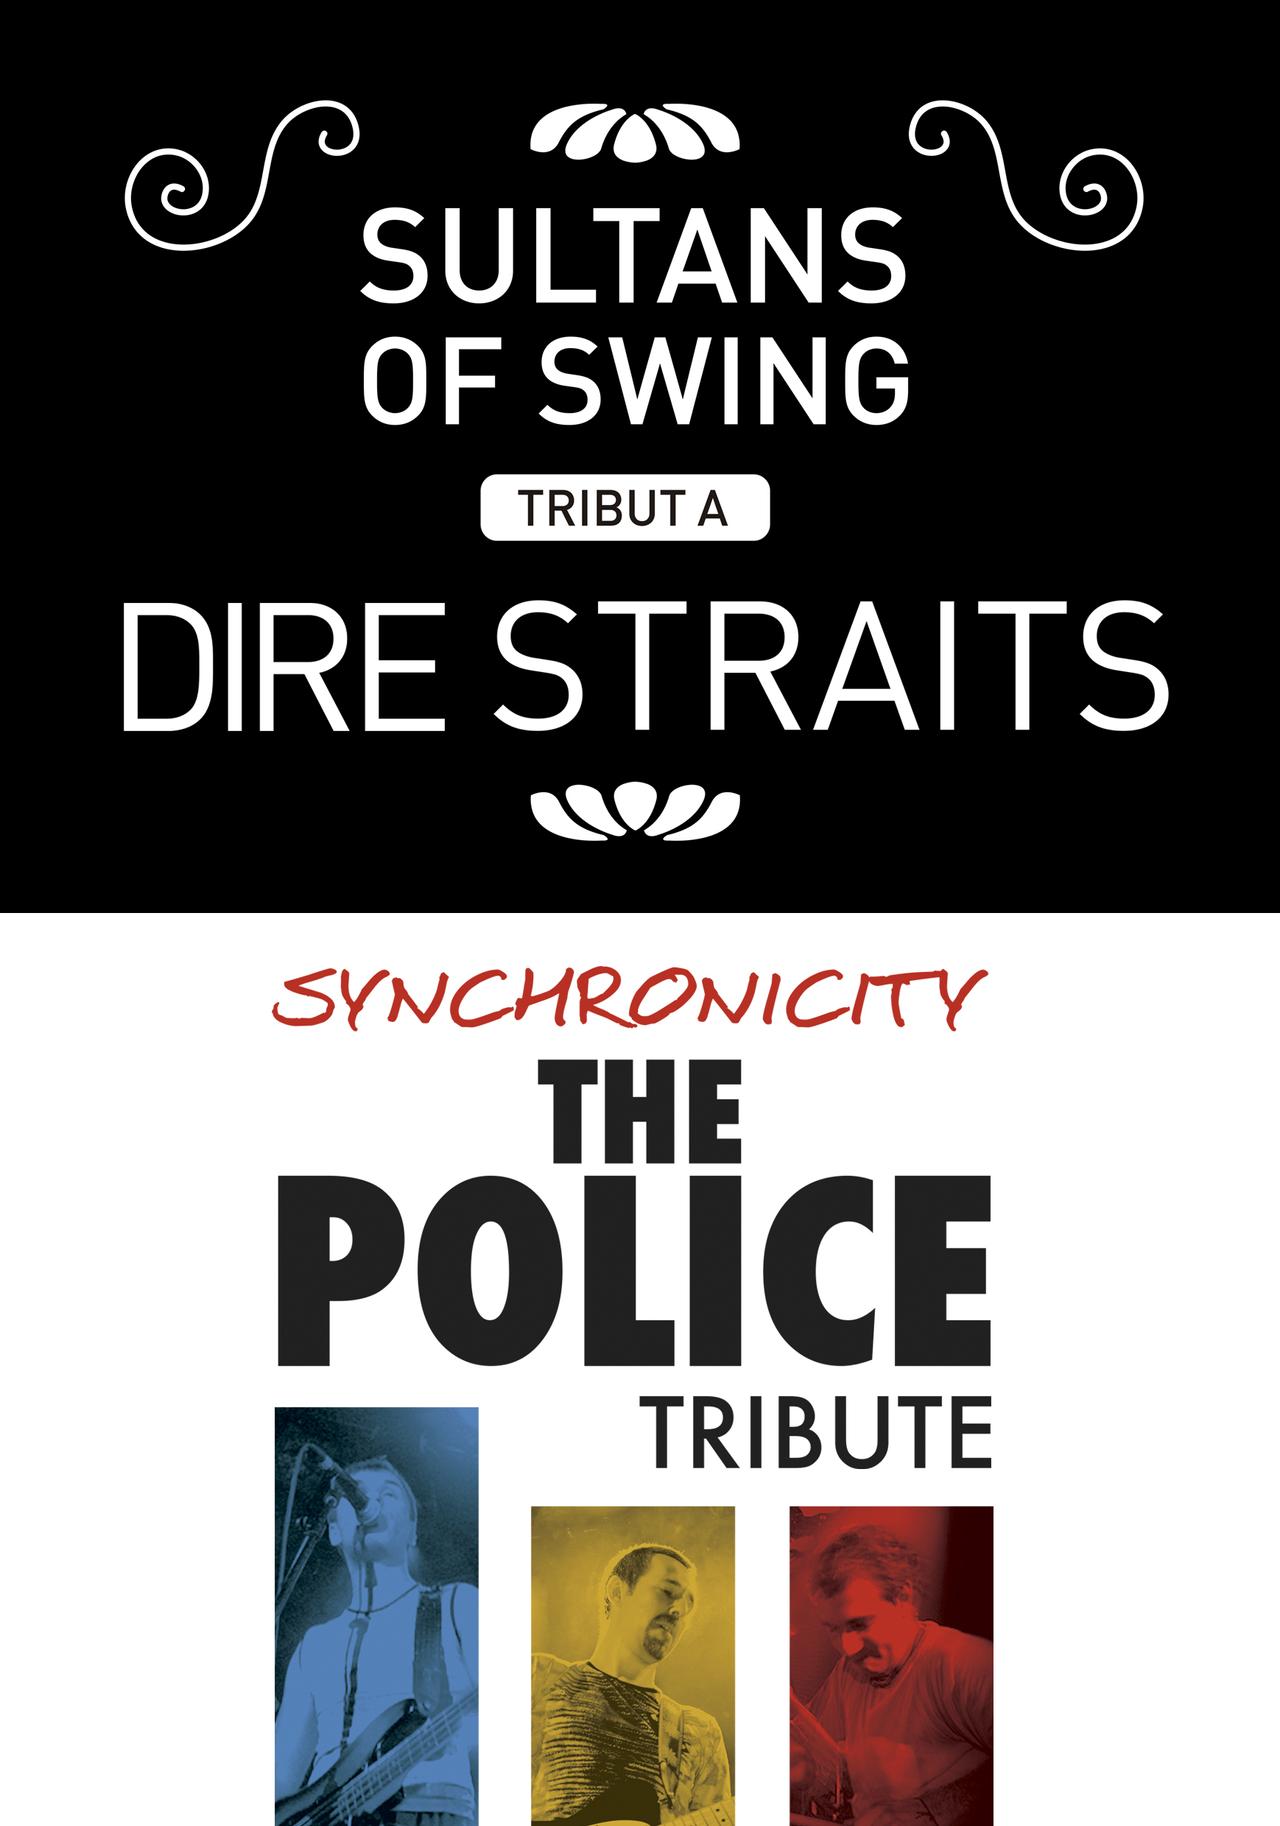 Tributo a Dire Straits y Police